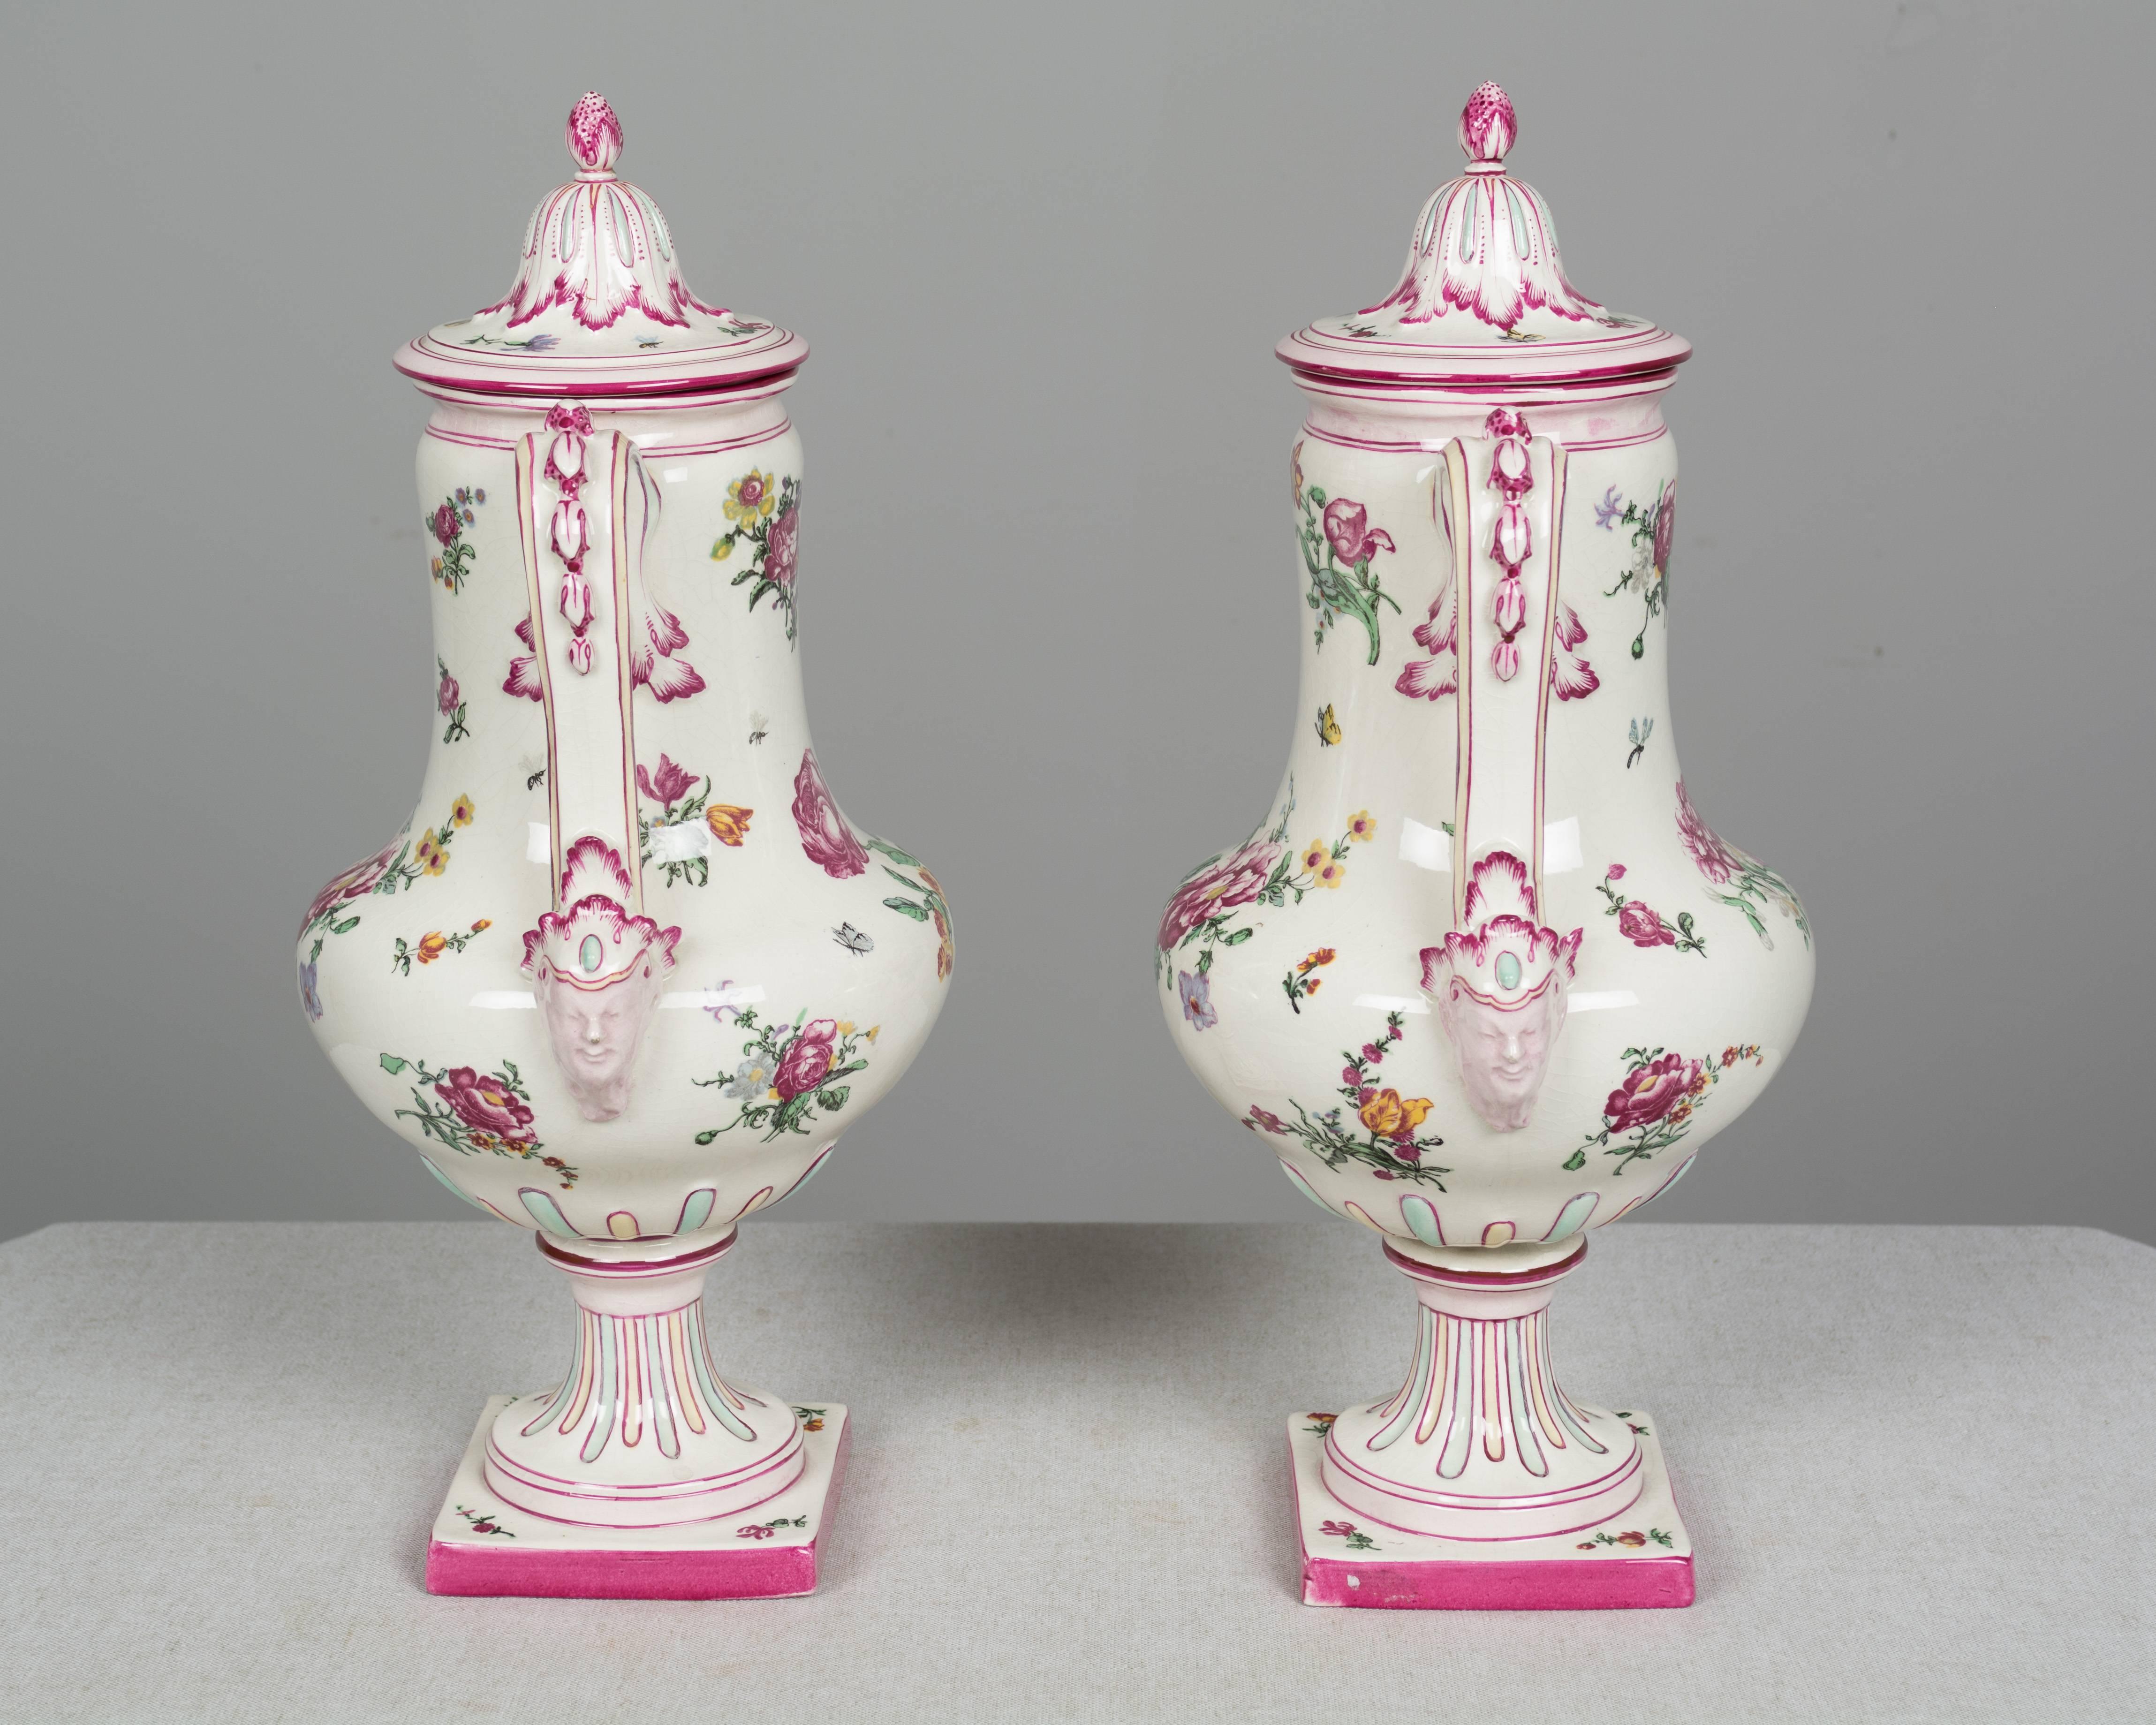 A pair of 19th century French Gien faience urns with hand-painted floral decoration. Nice form with double handles and square pedestal base. Lids with strawberry knobs. Gien stamp on underside, circa 1866. Measures: 16.5" H x 9" W x